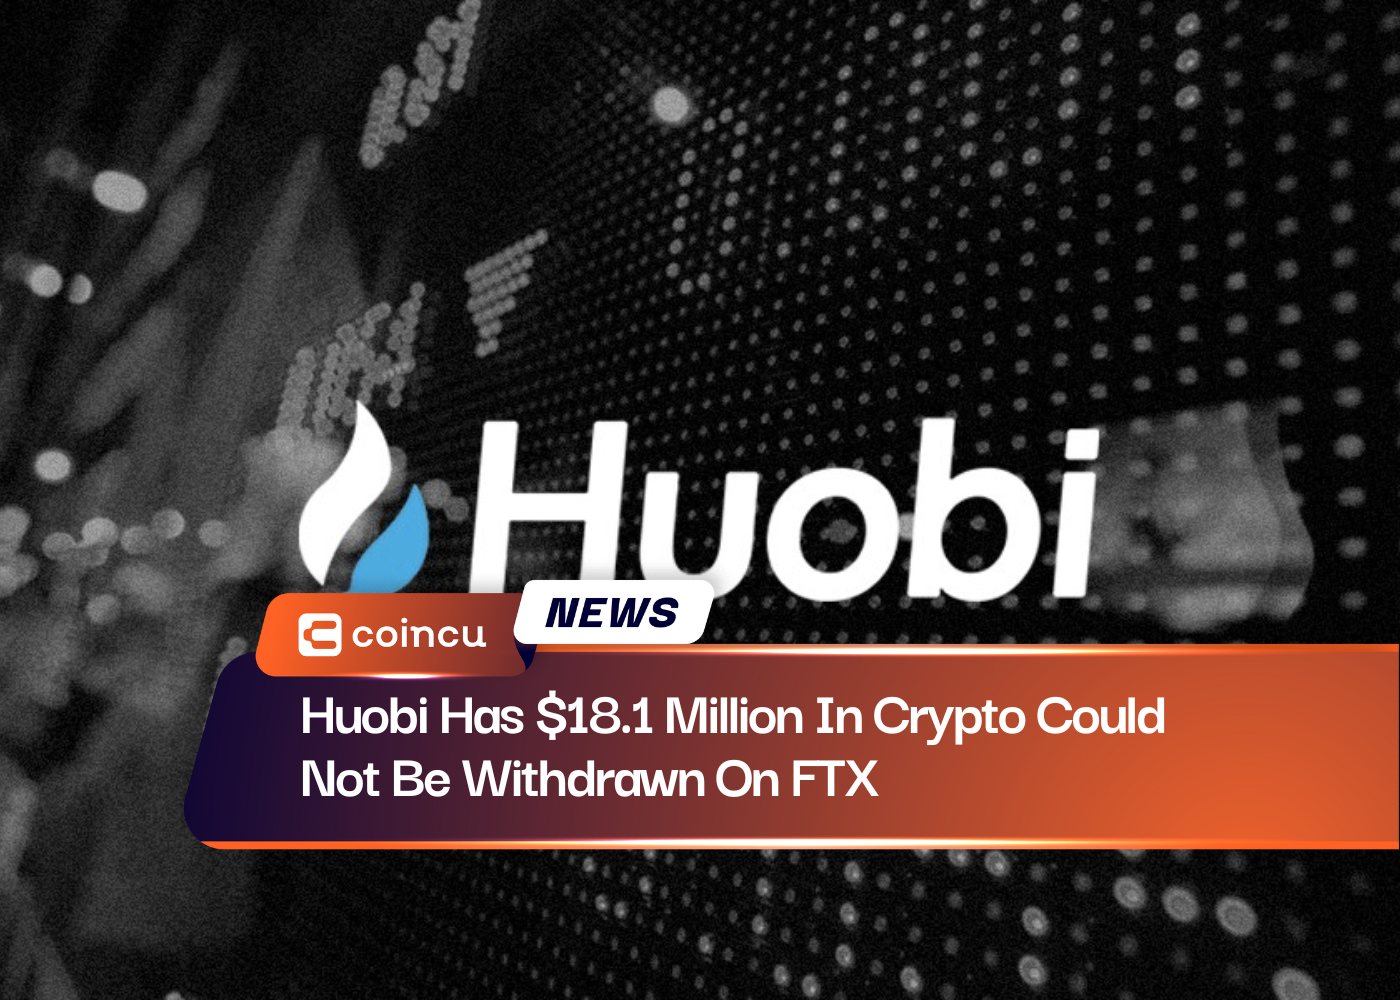 Huobi Has $18.1 Million In Crypto Could Not Be Withdrawn On FTX